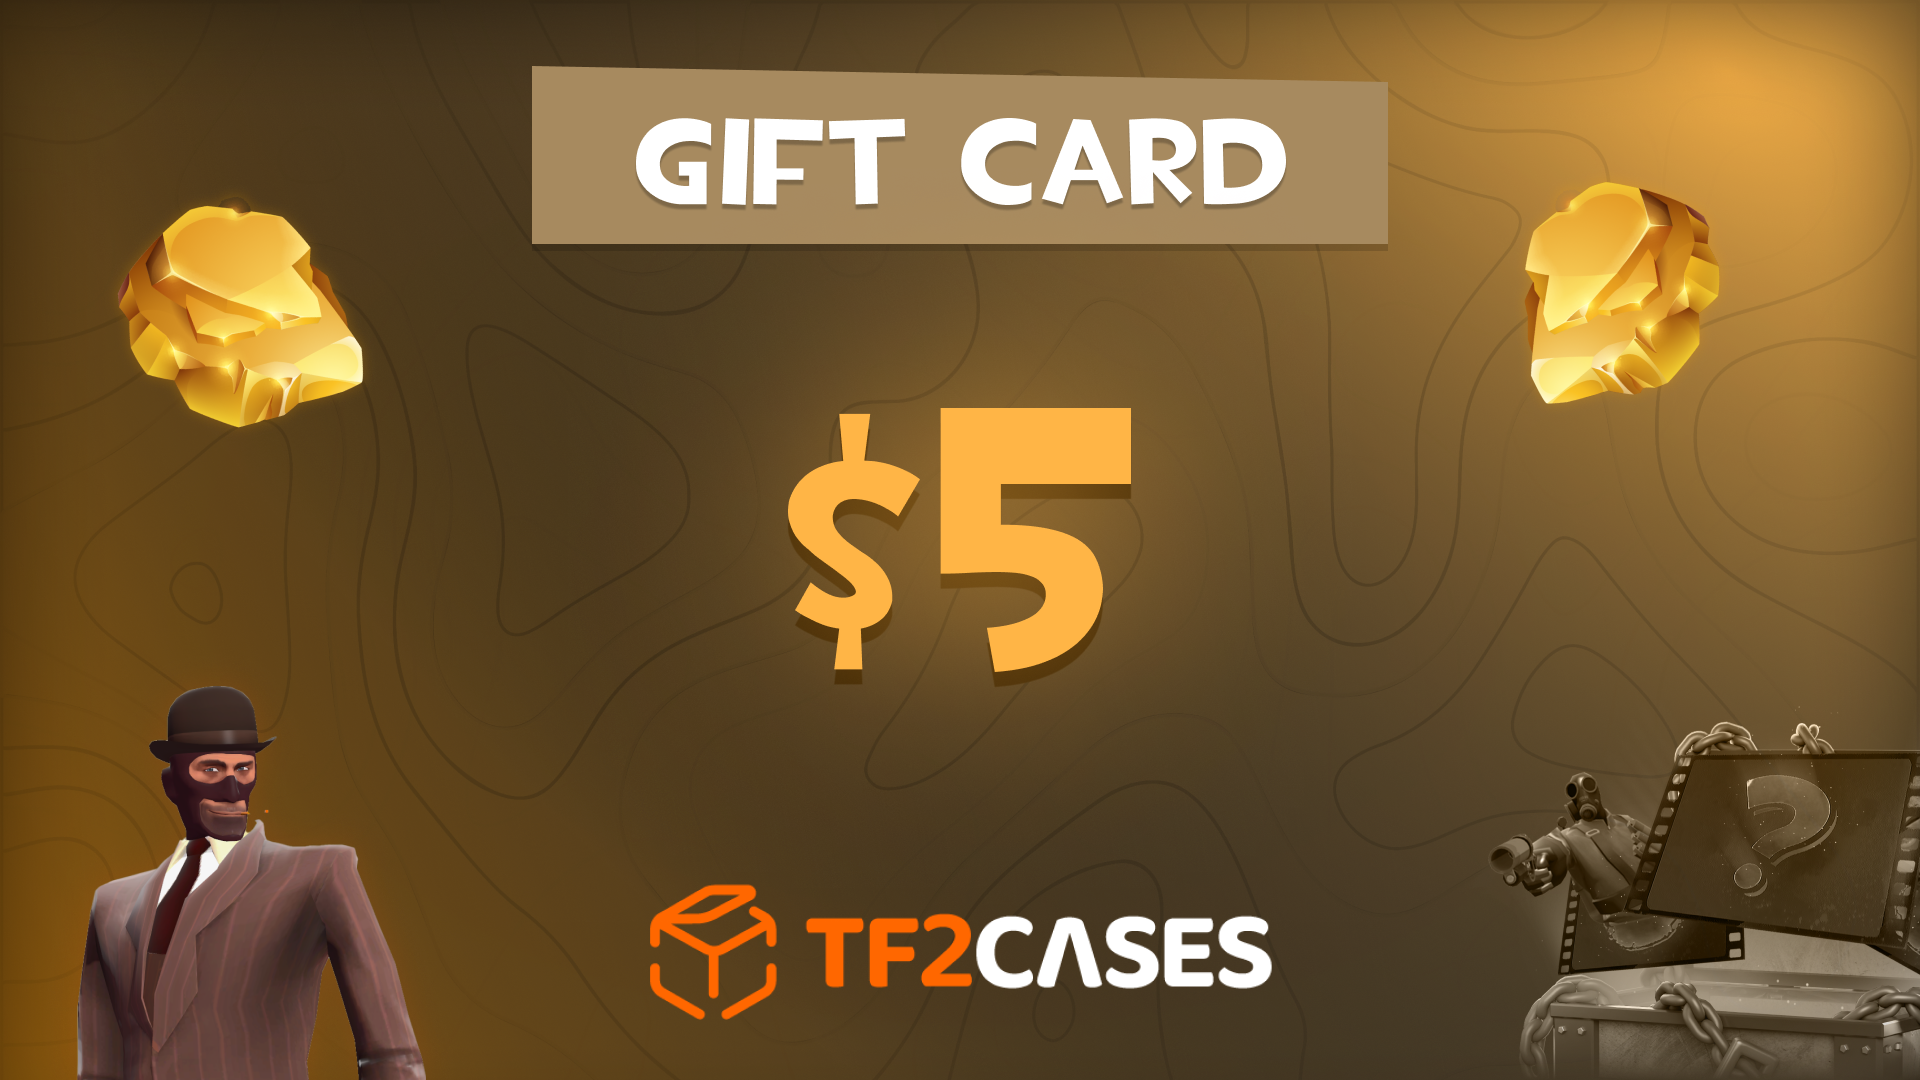 TF2CASES.com $5 Gift Card $5.65